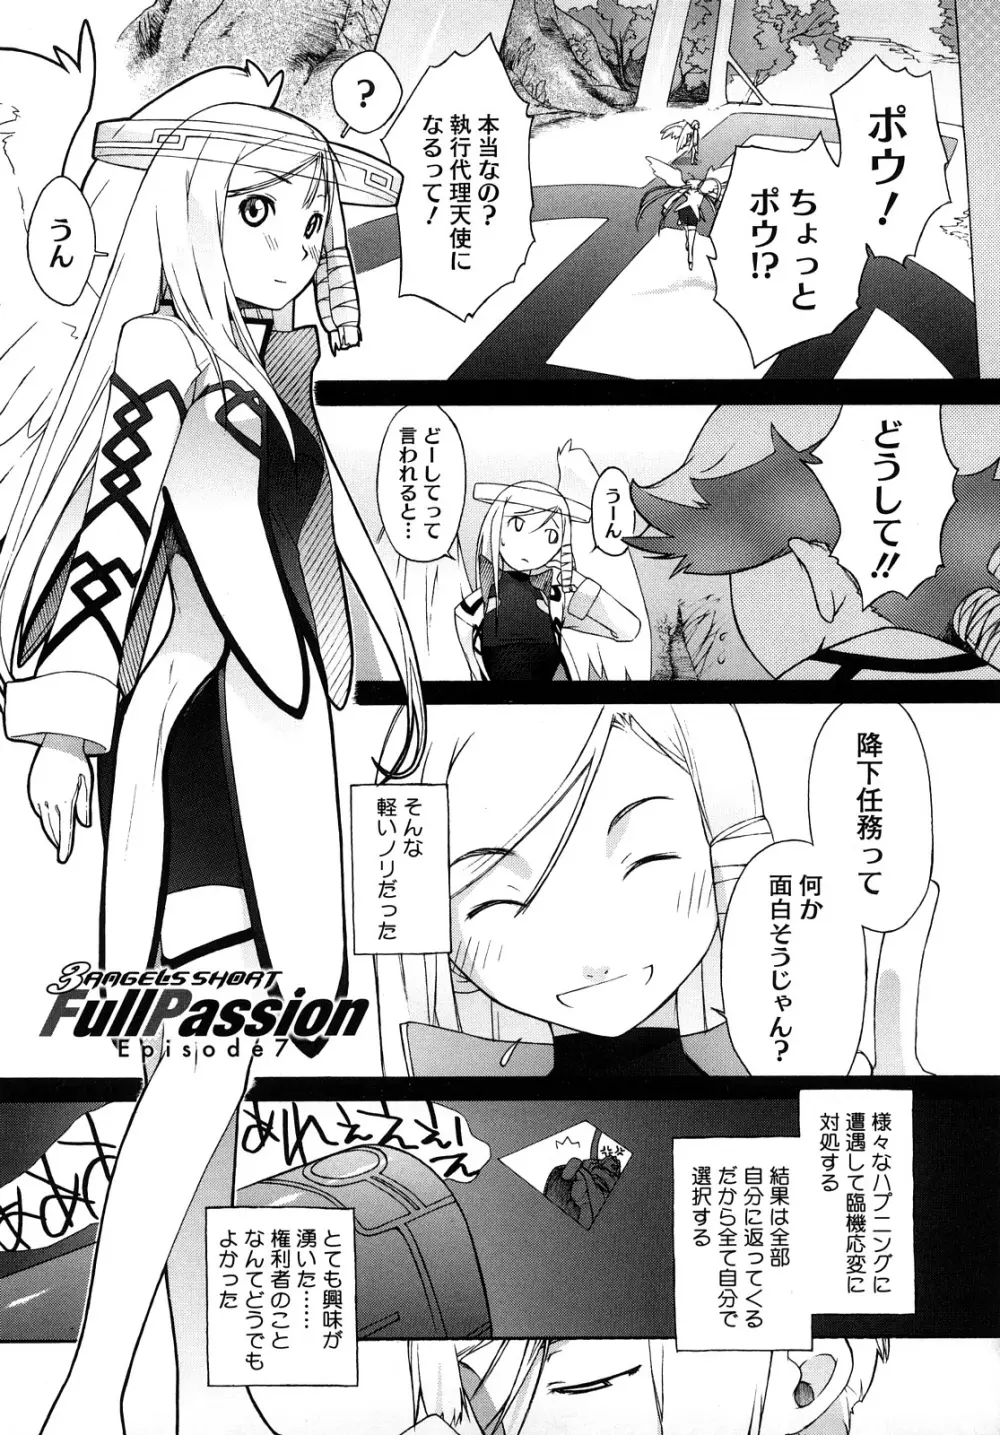 3ANGELS SHORT Full Passion Page.176